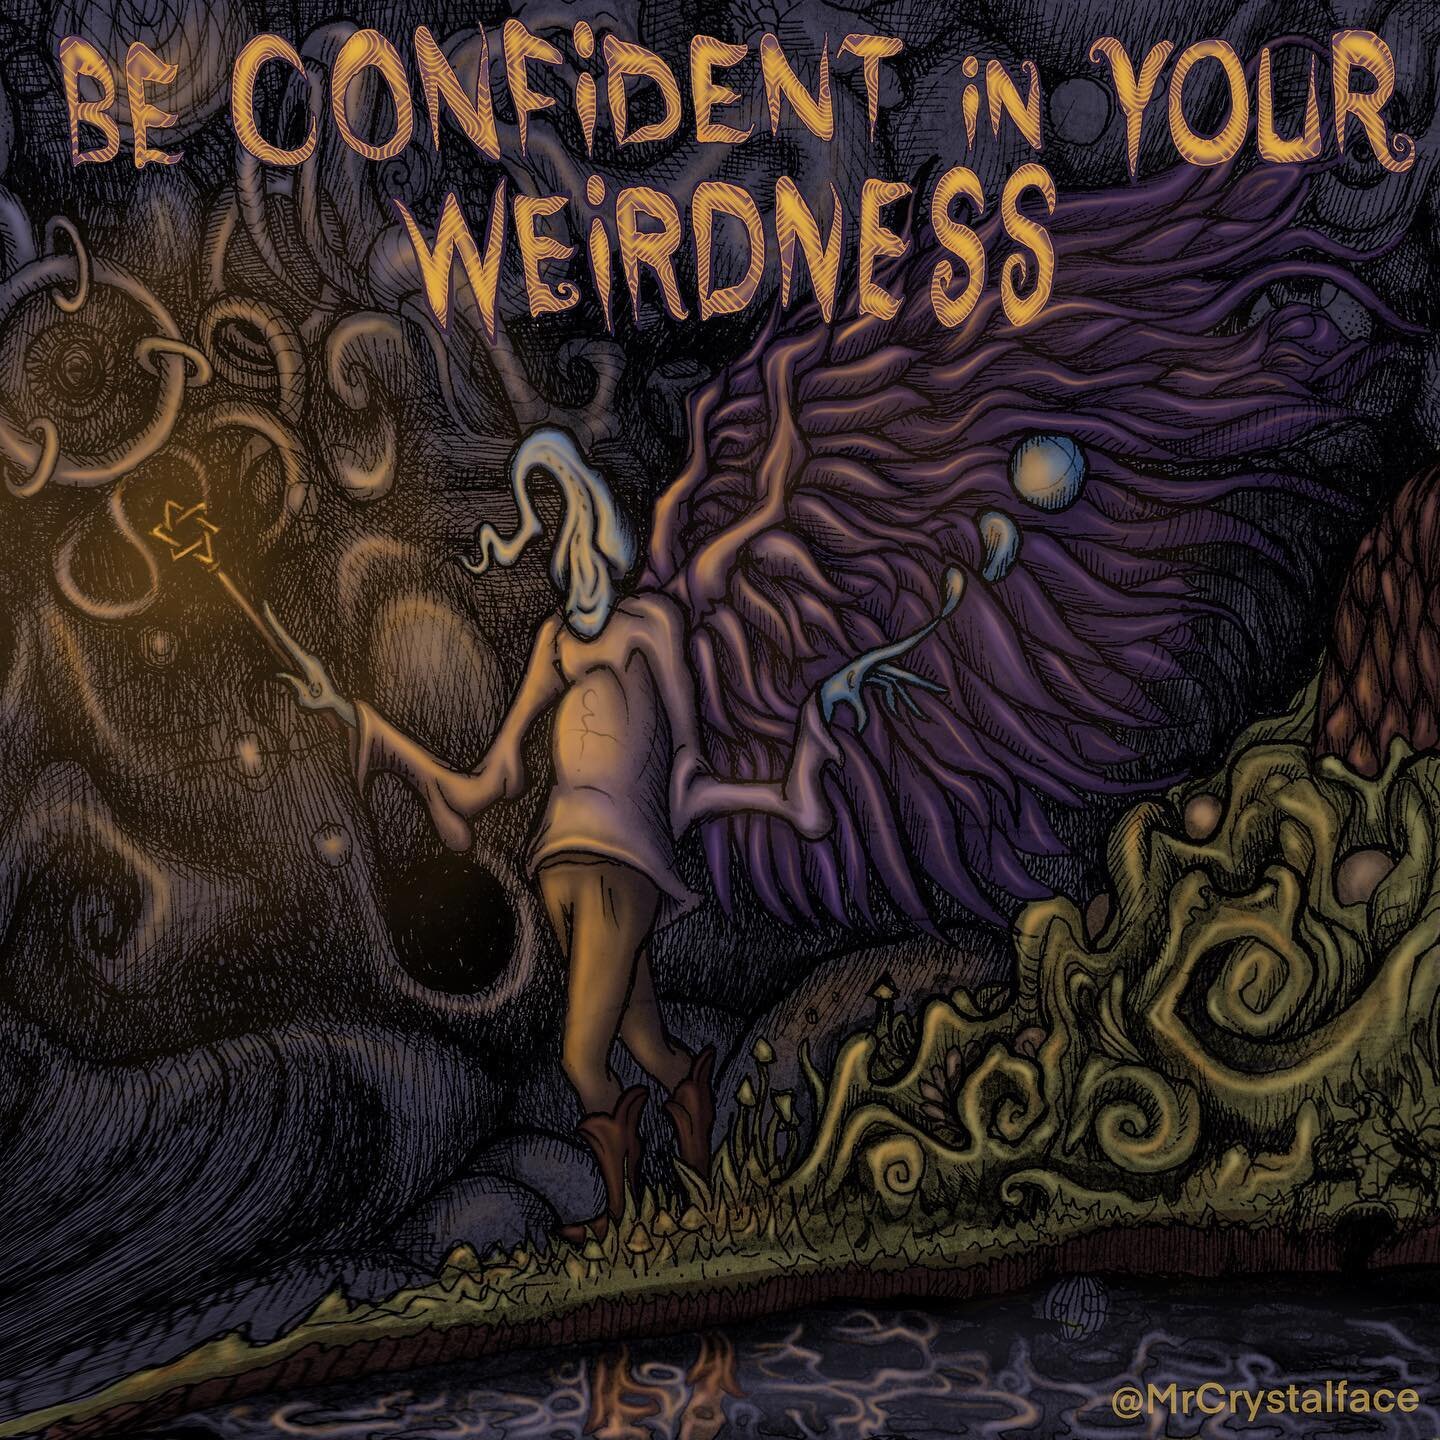 &lsquo;Be confident in your weirdness&rsquo; 🕺 🧙&zwj;♀️- stickers are available, link in bio (MrCrystalface.com &gt; store &gt; stickers)